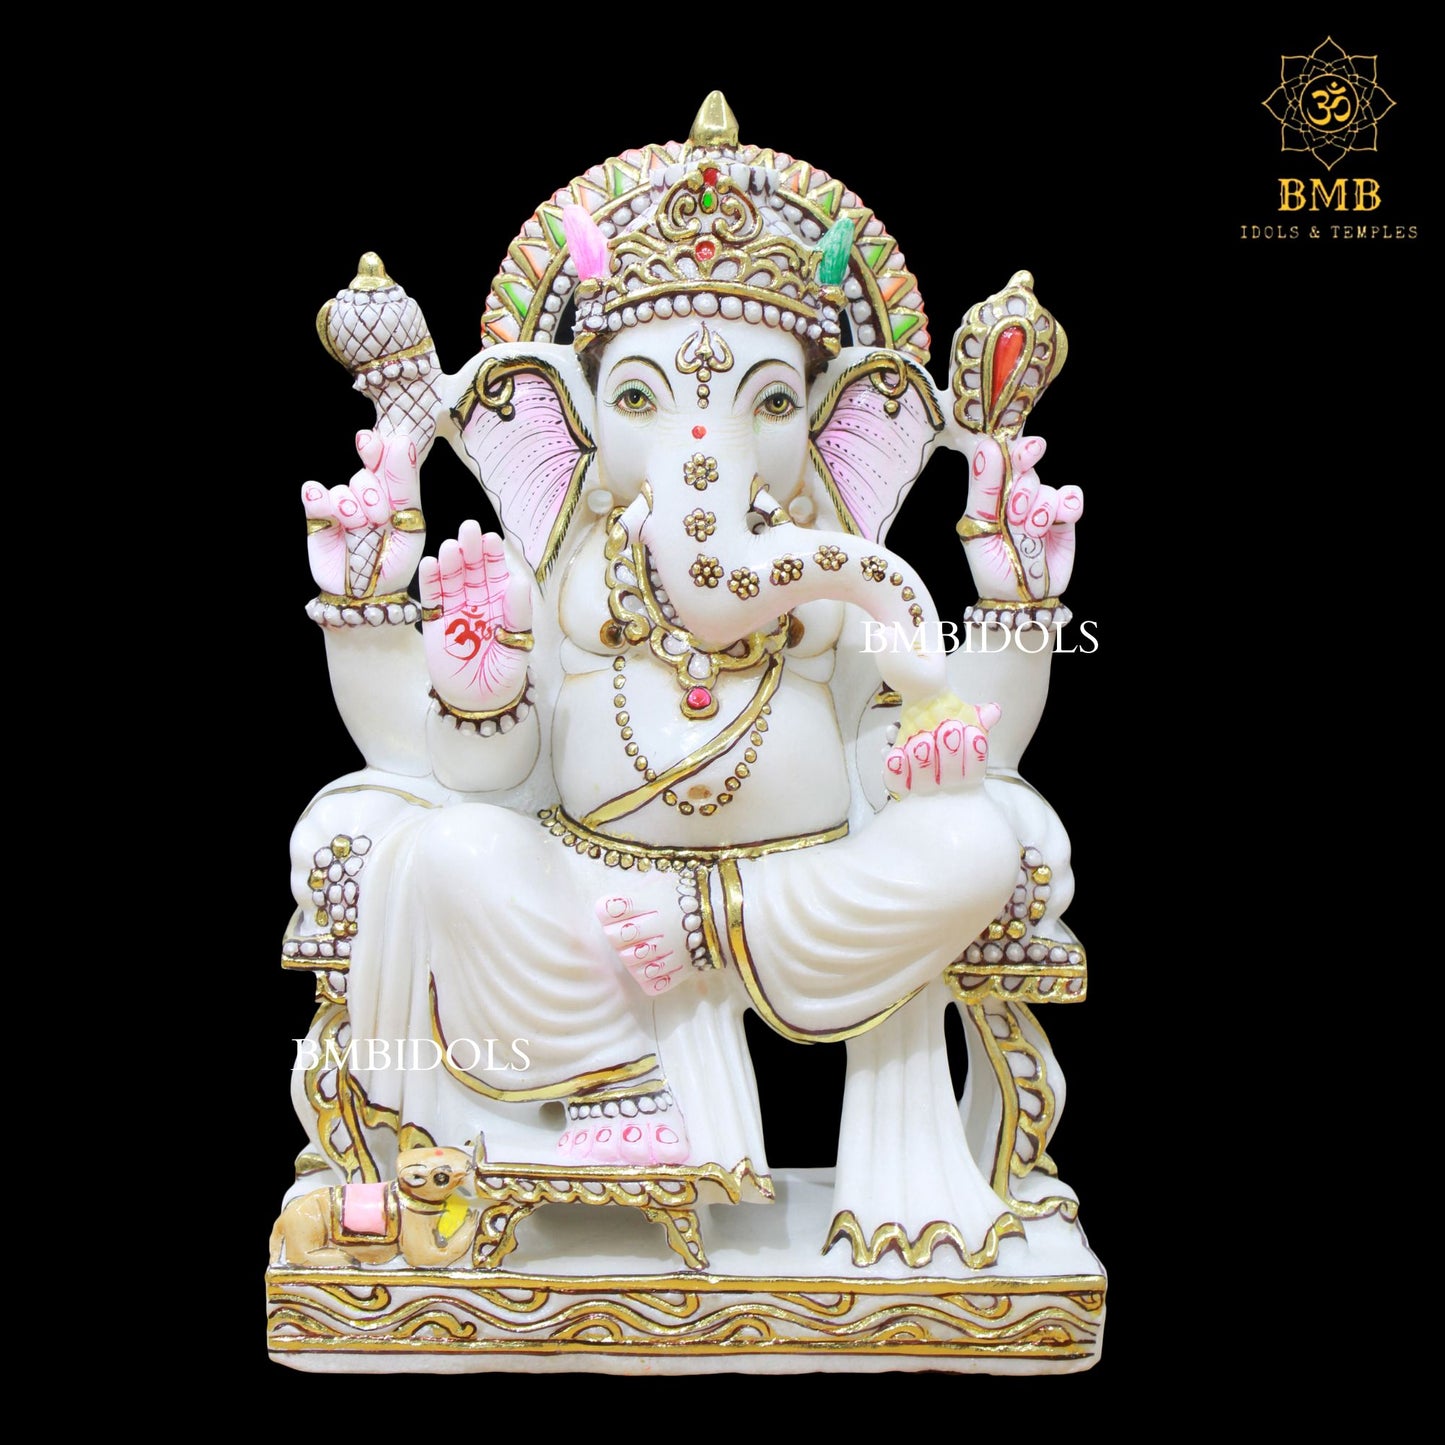 White Marble Ganesh Murti with Four Hands in 15inches